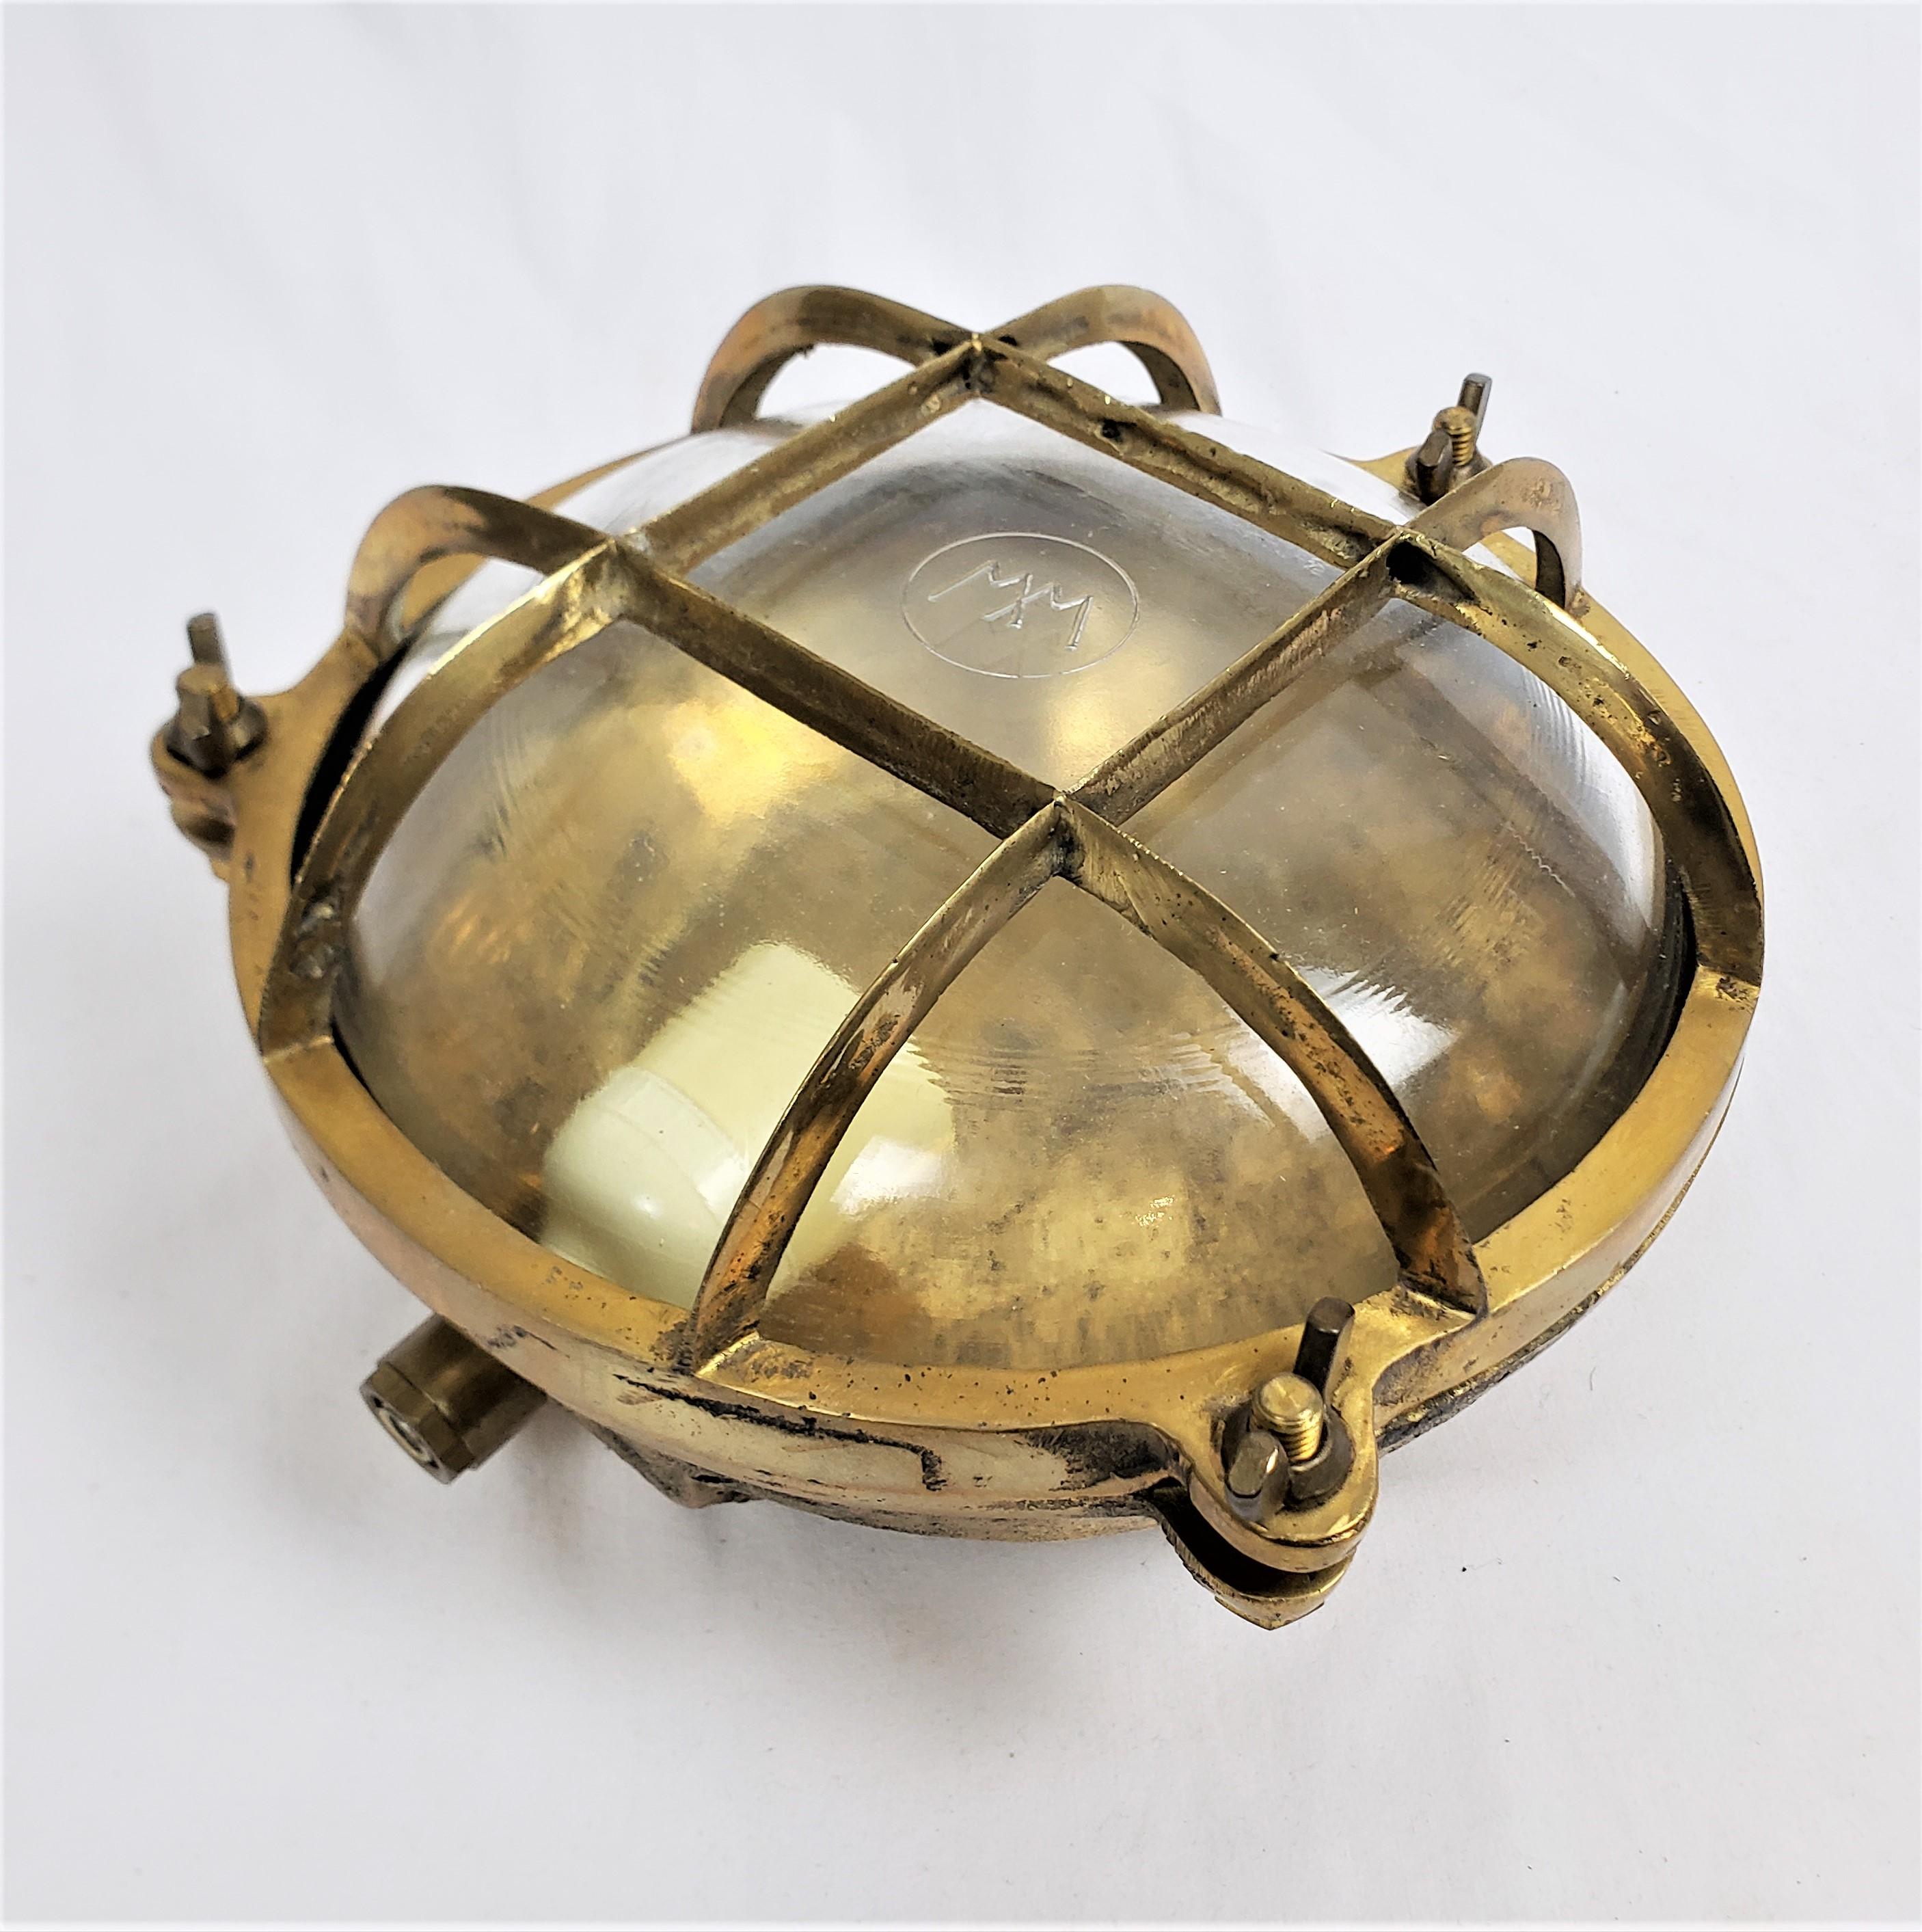 This antique brass nautical styled light is unsigned, except for some markings on the lens, but presumed to have originated from Germany and date to approximately 1920 and done in the period Art Deco style. The housing and cage are composed of heavy